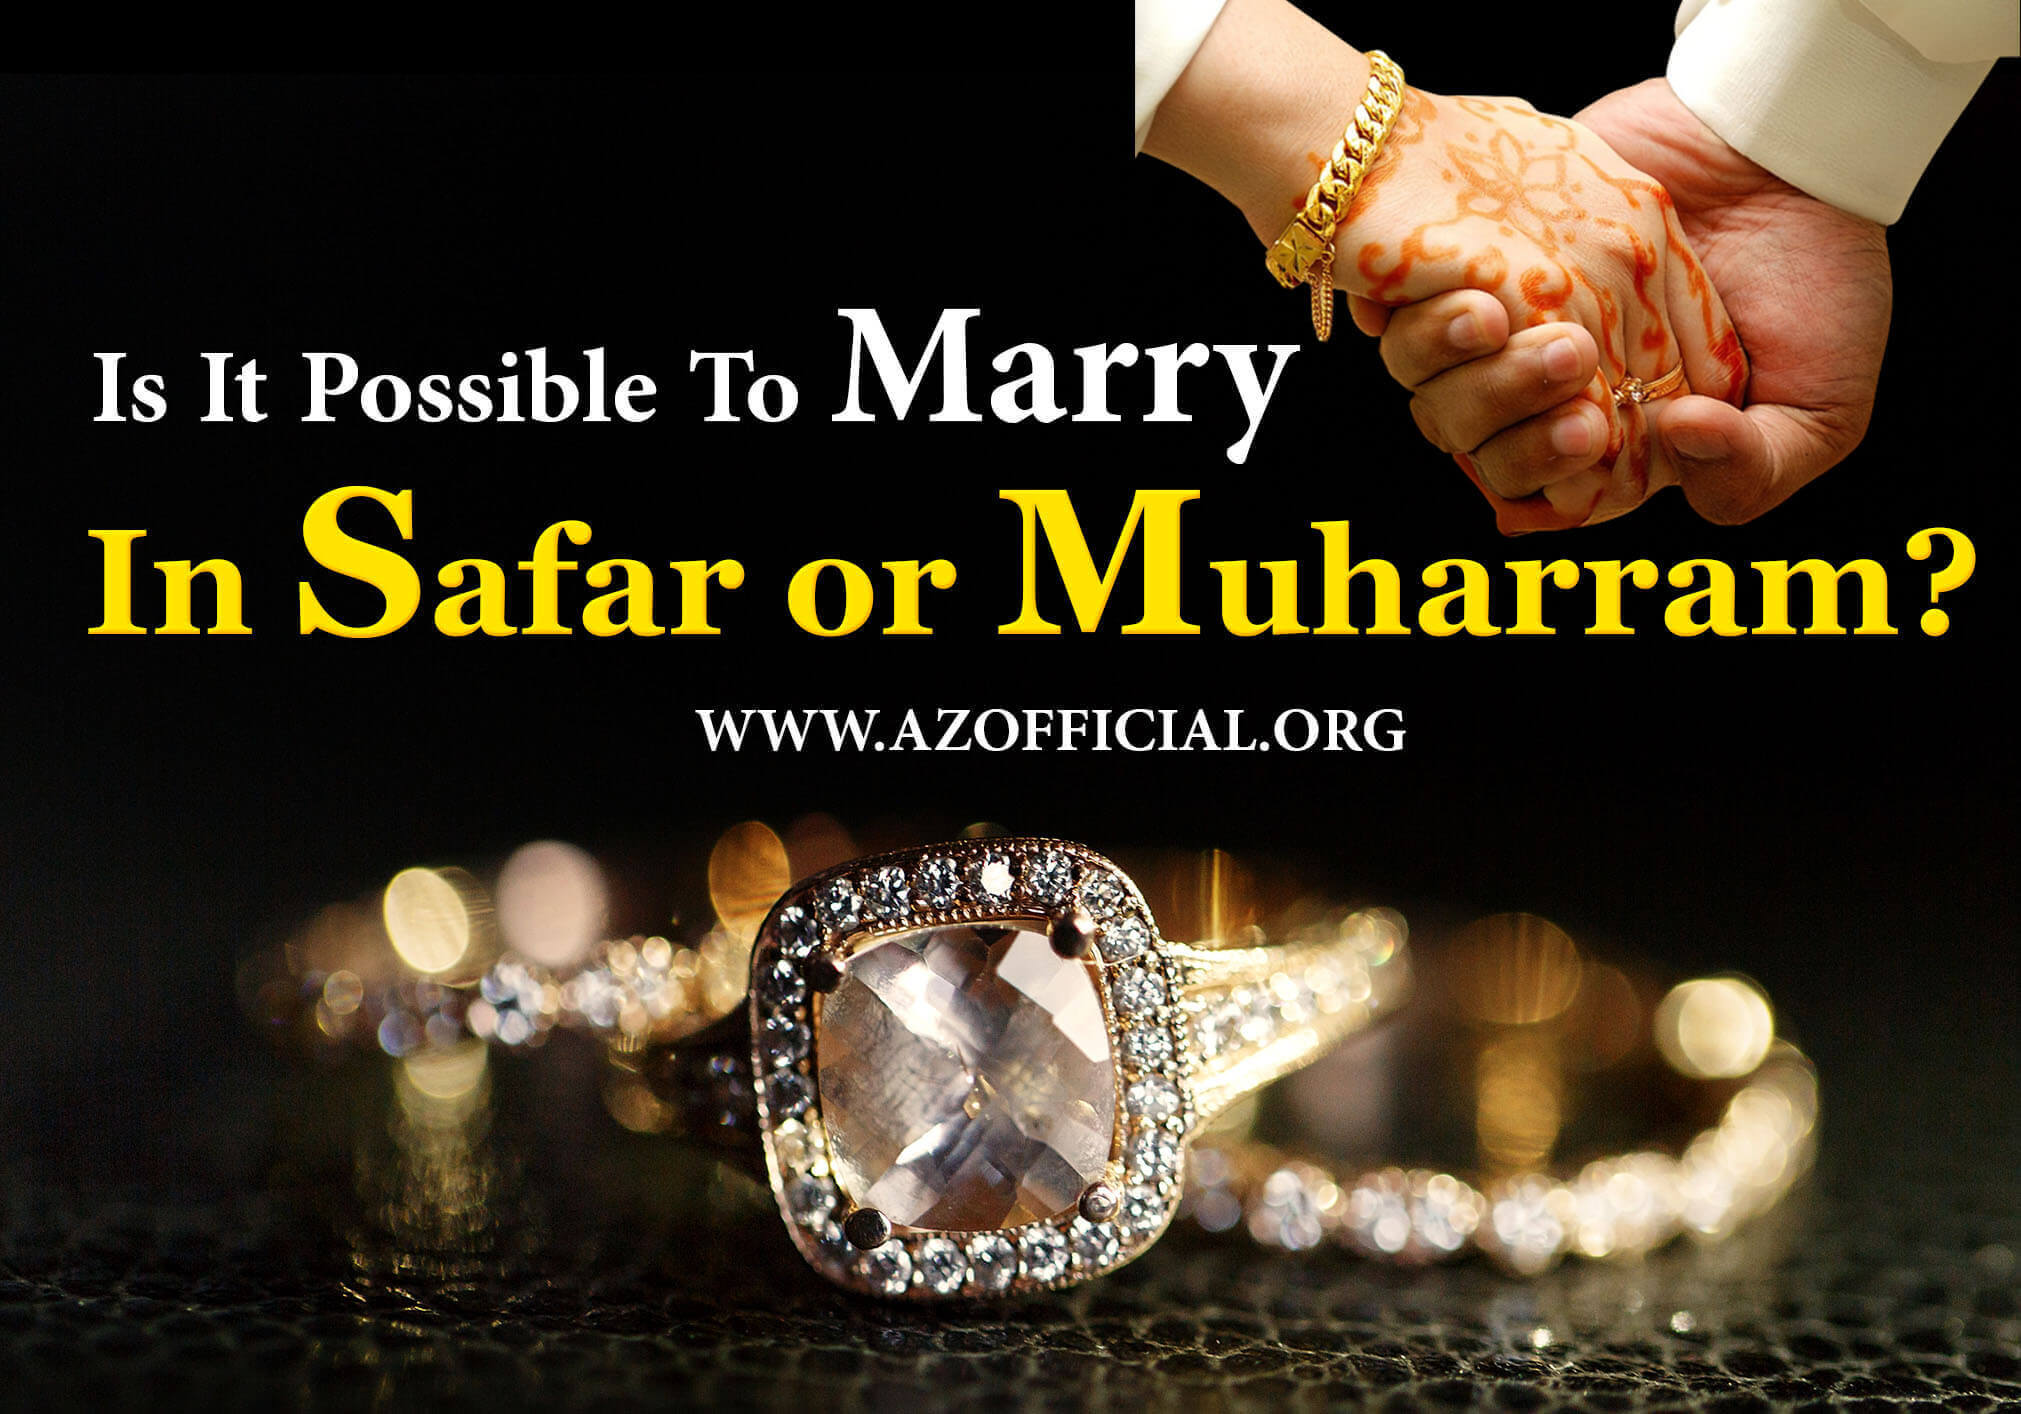 Is It Possible To Marry In Safar or Muharram?